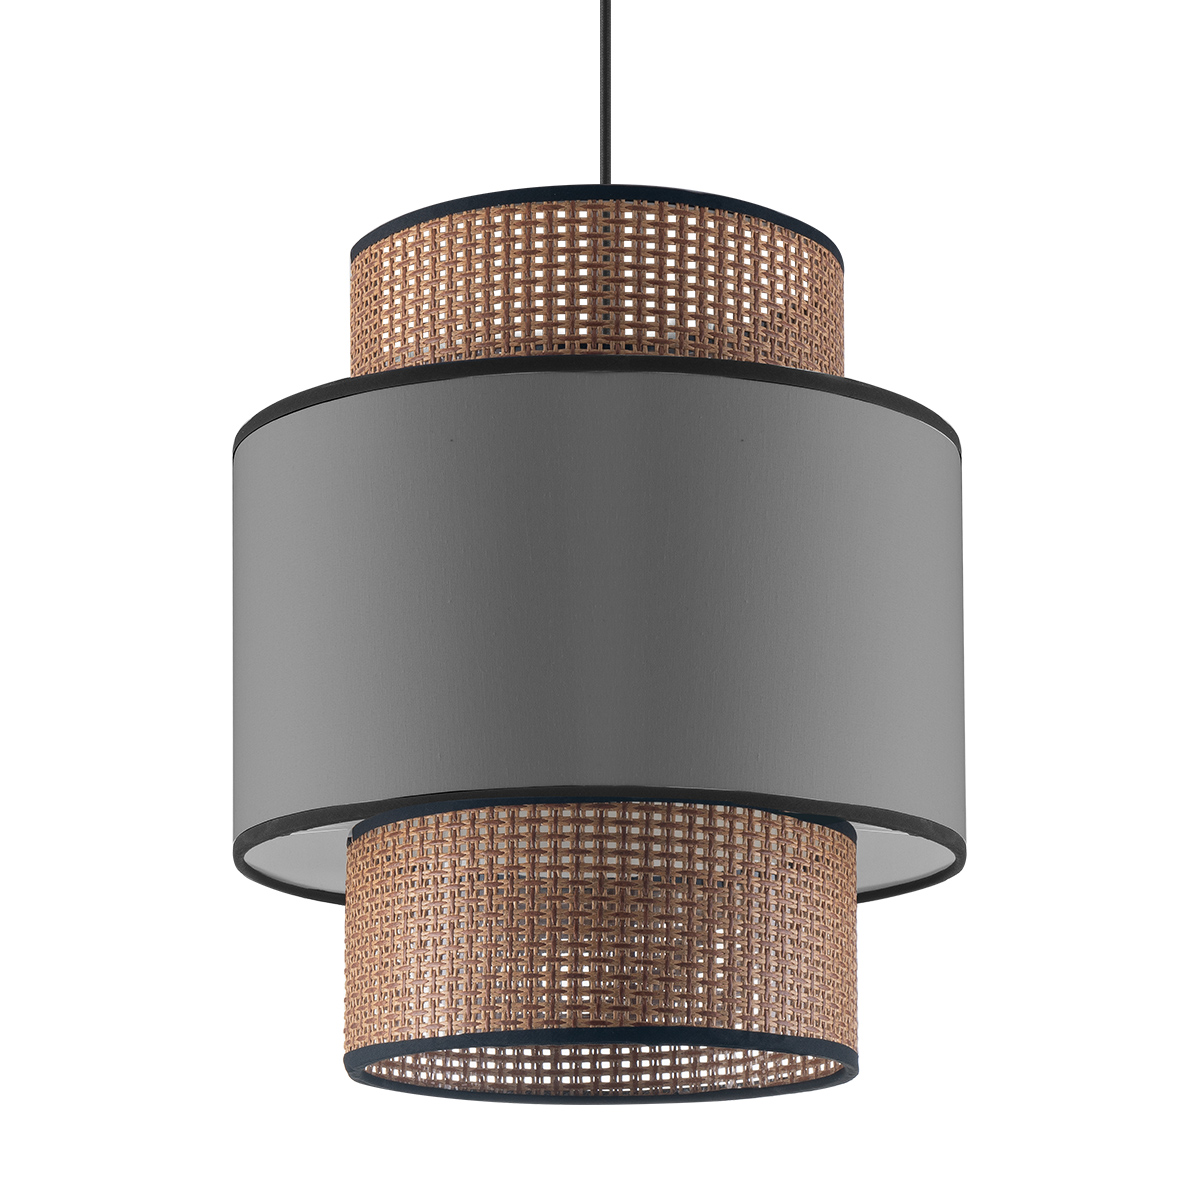 Tangla lighting - TLS7014-30GY - Decorative Lampshade - natural rattan and TC fabric in grey - night - E27